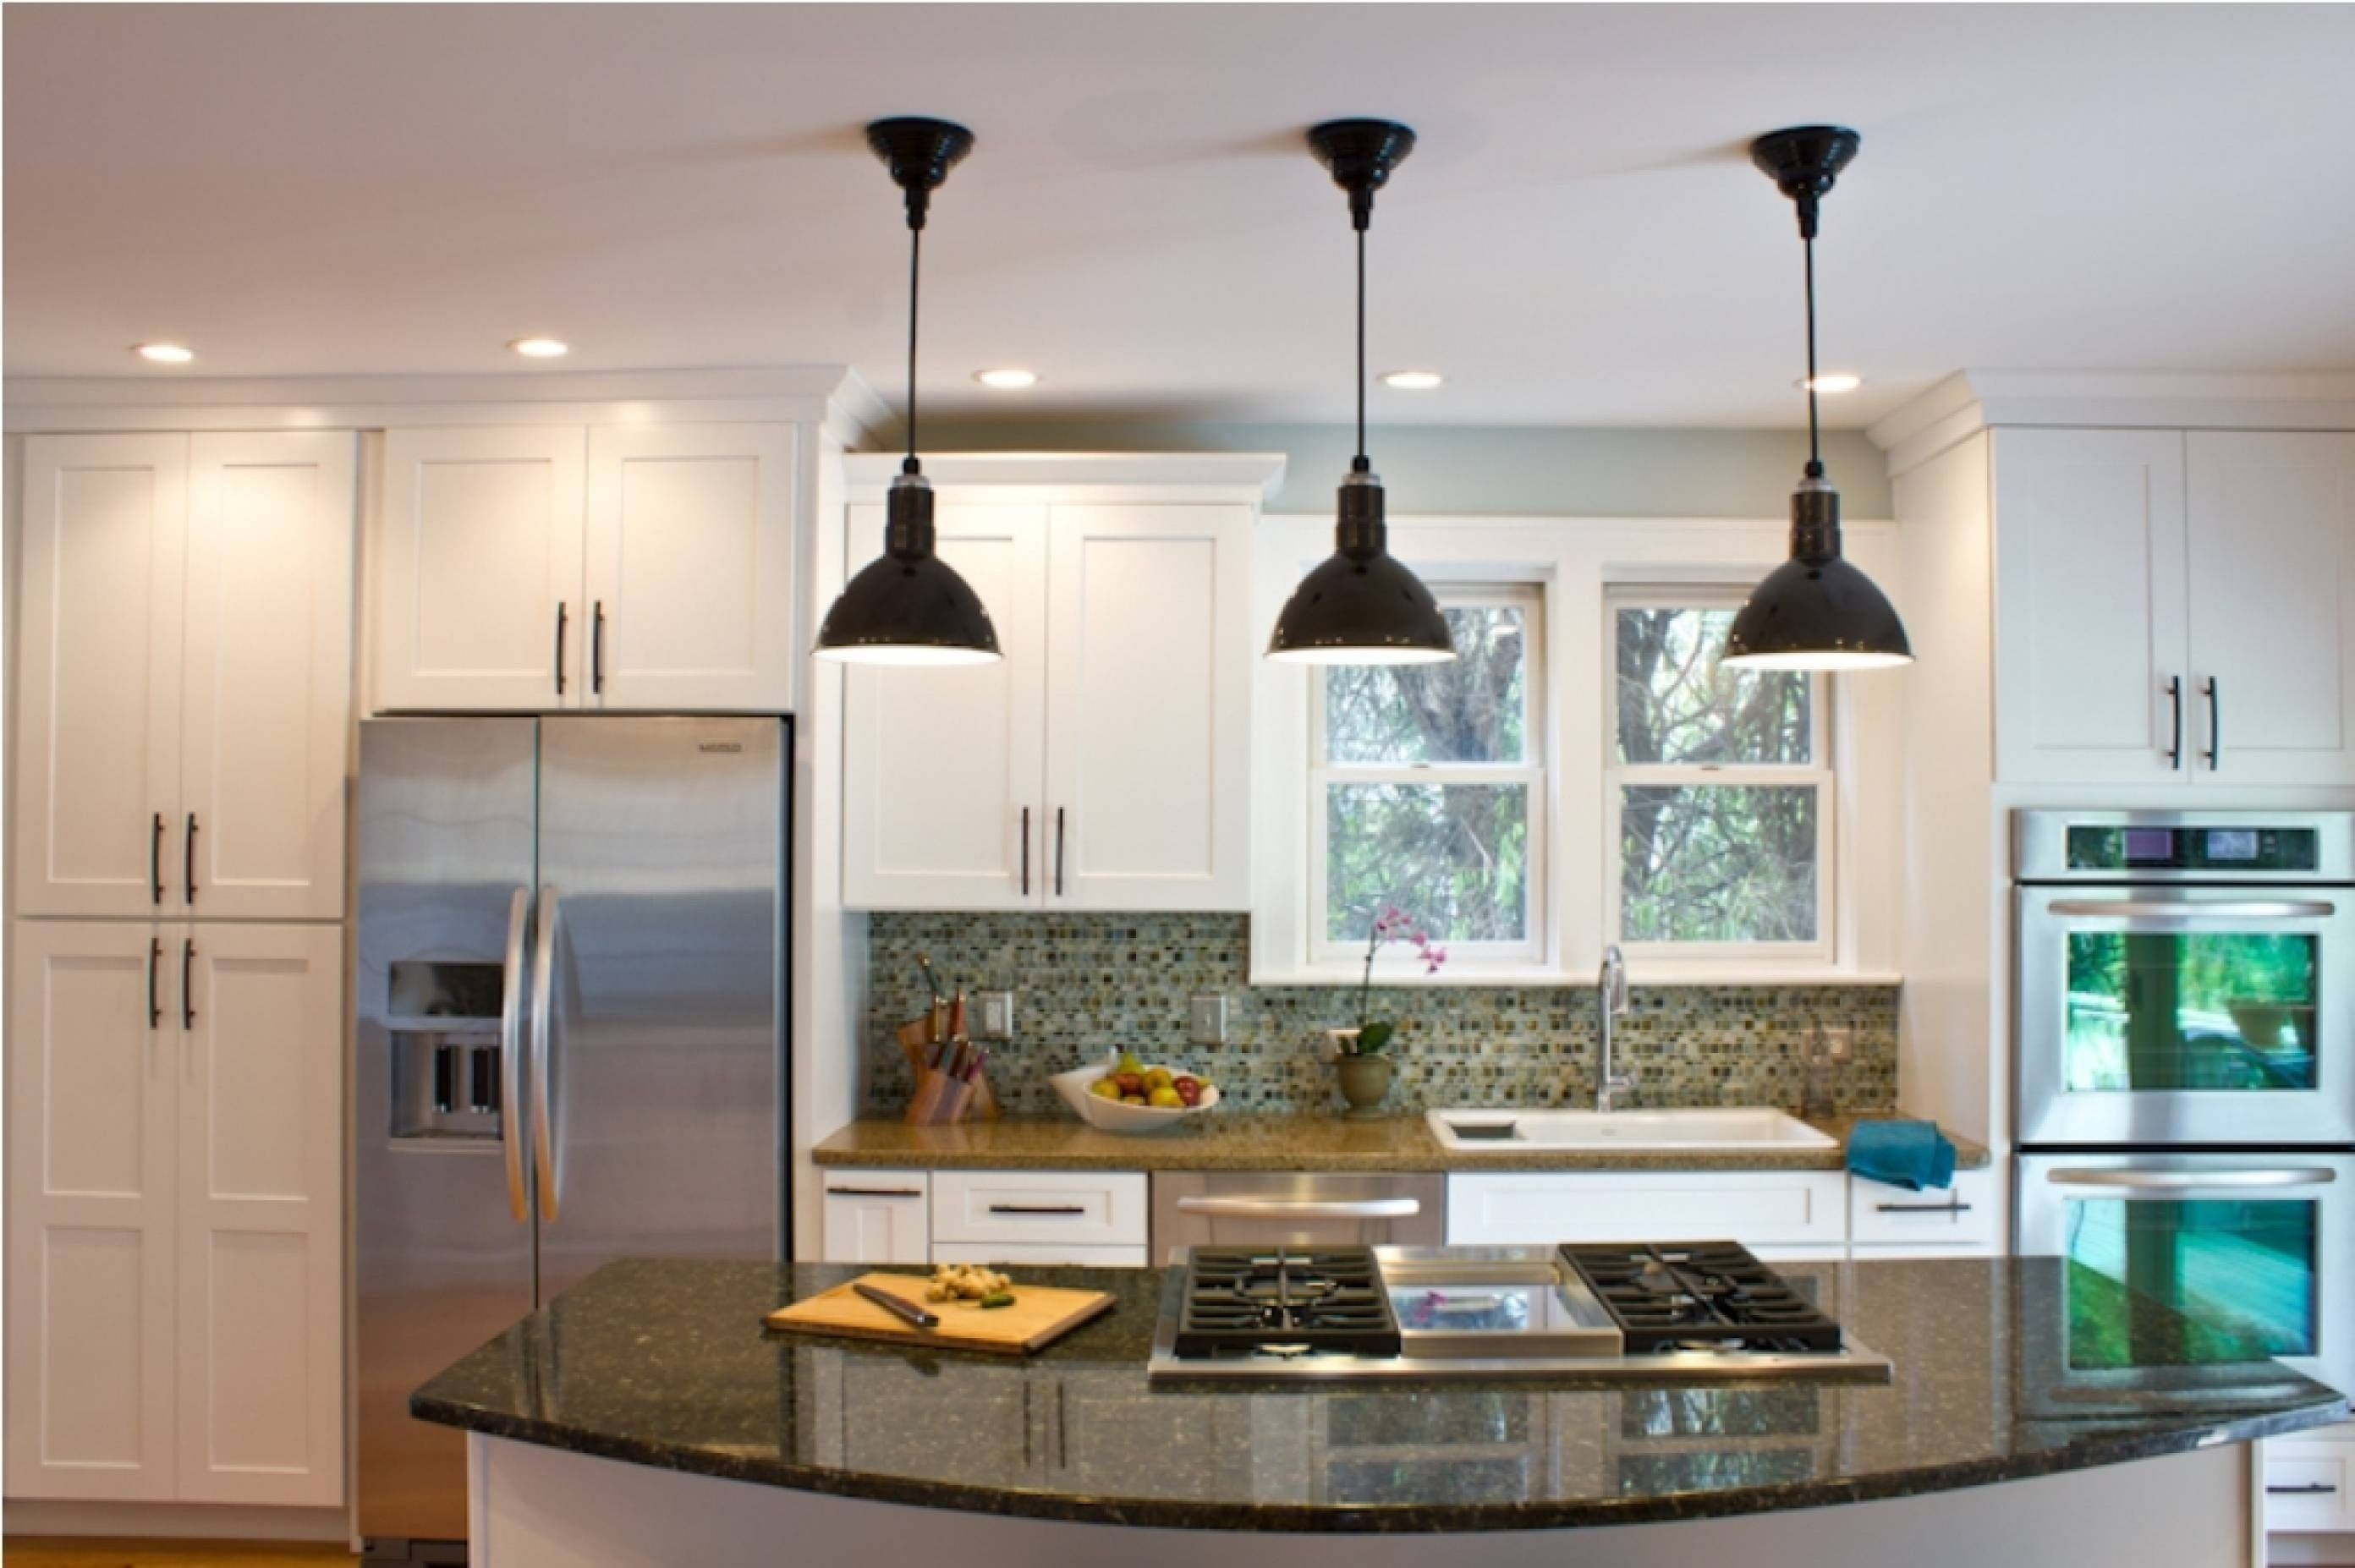 Kitchen Lighting: Spacing Pendant Lights Over Bar Different Intended For Blue Kitchen Pendant Lights (View 12 of 15)